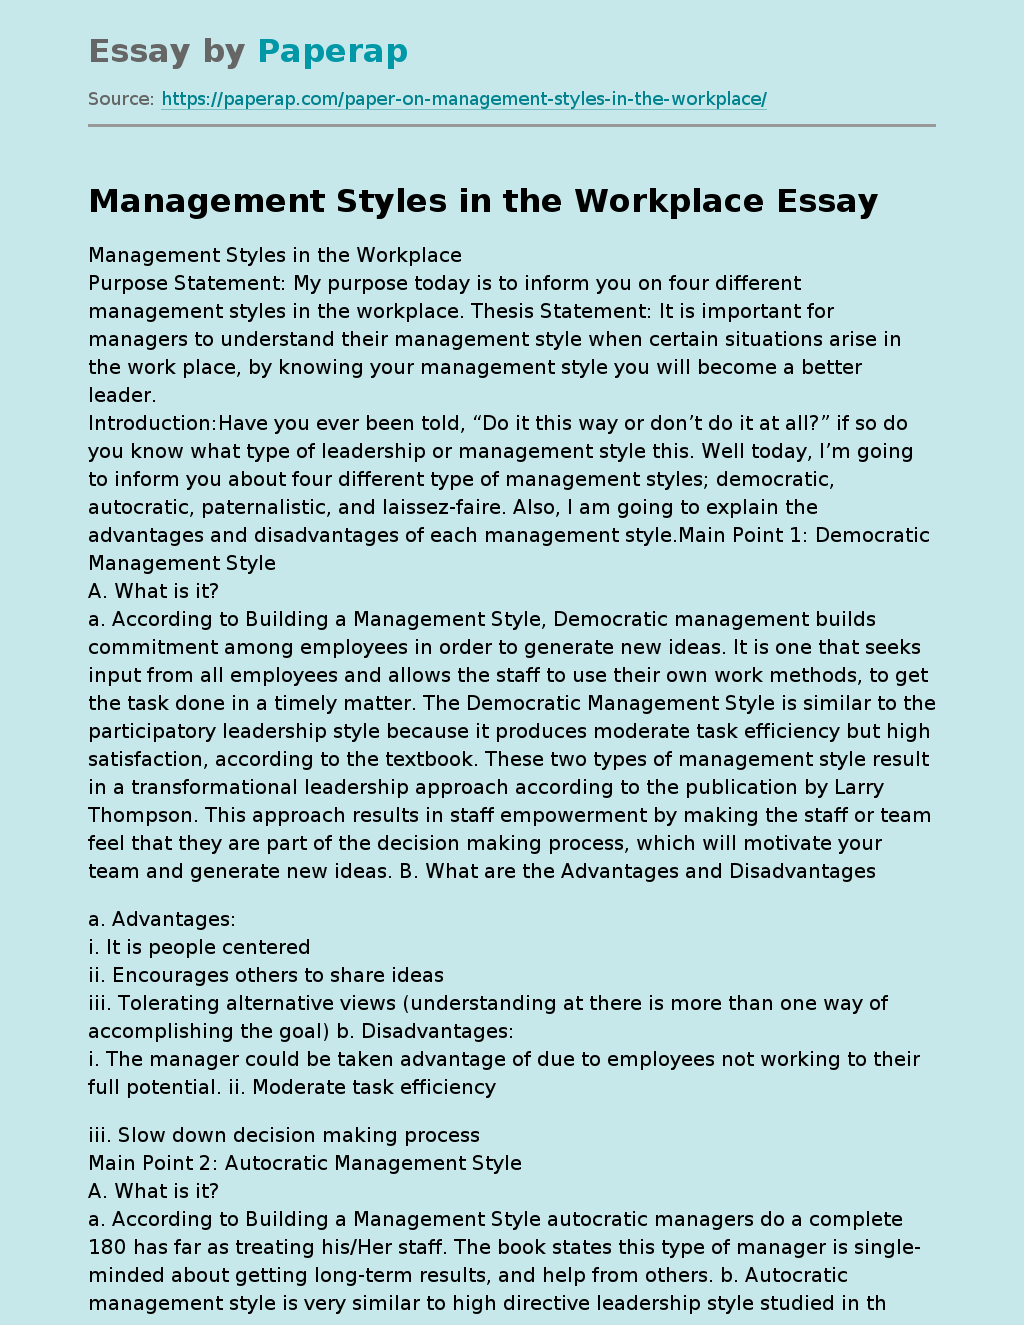 Management Styles in the Workplace